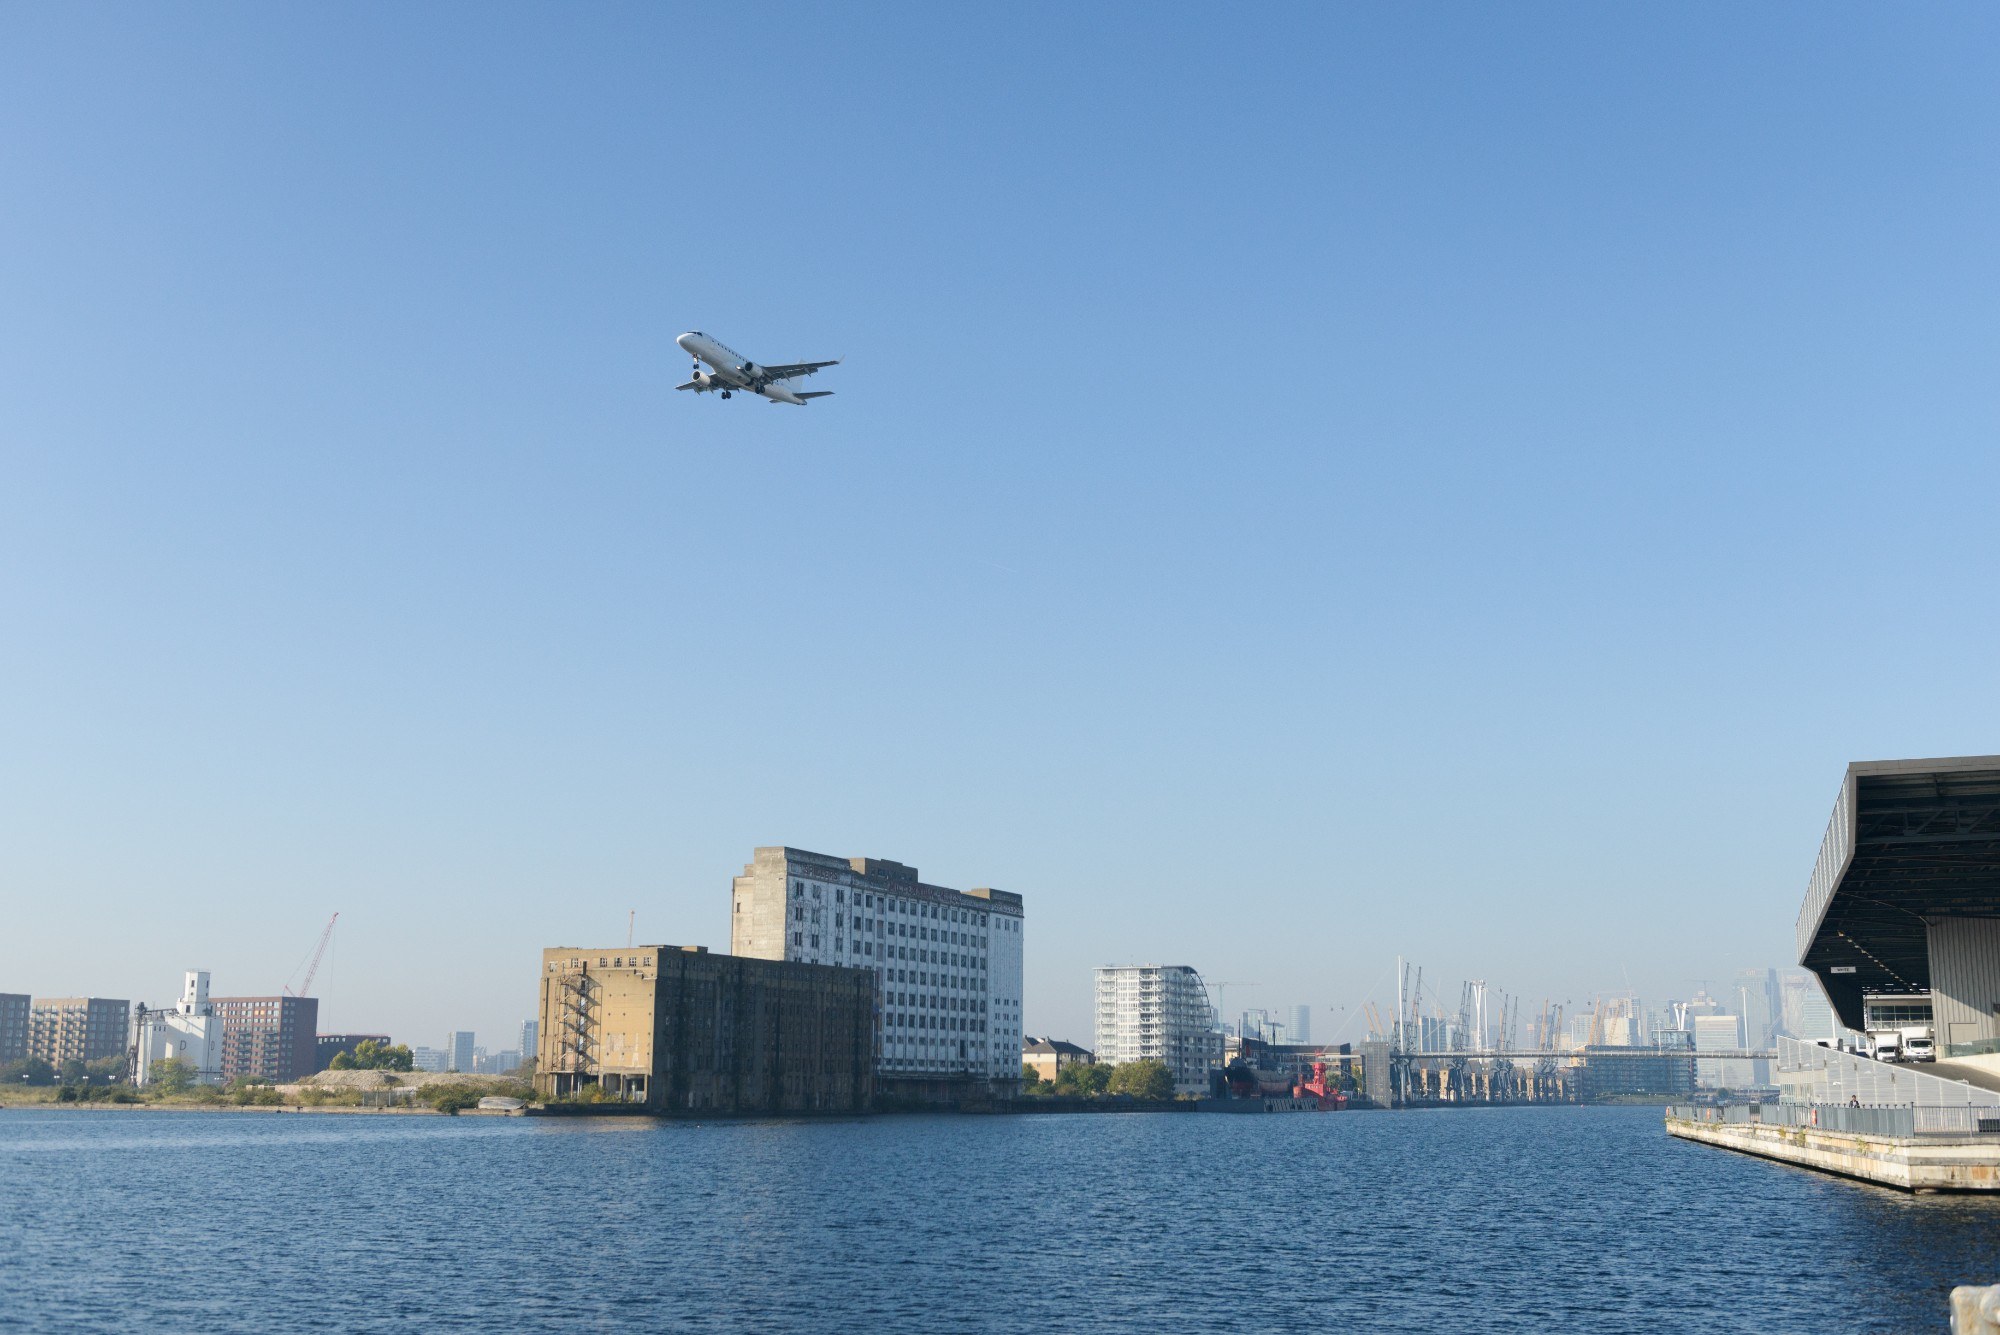 A plane flying over Millennium Mills